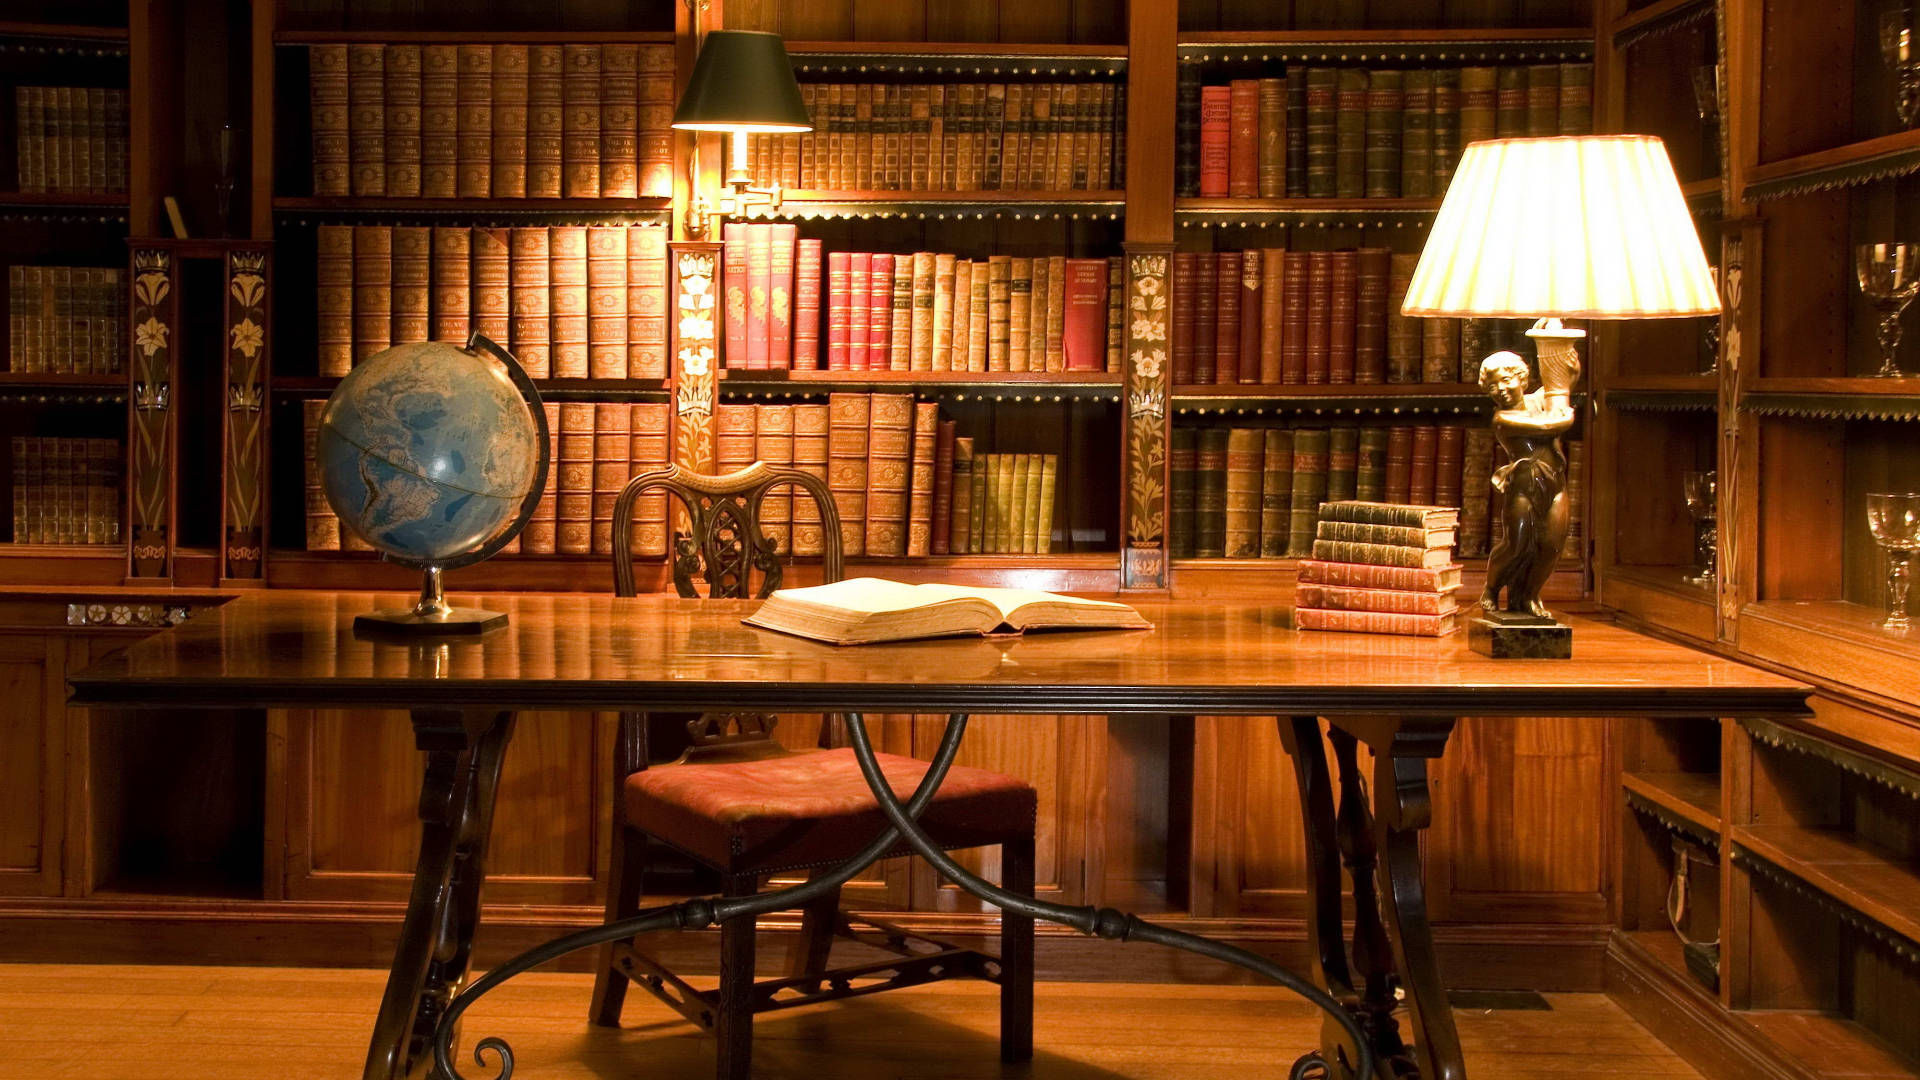 Caption: Traditional Library Desk In An Elegant Setting